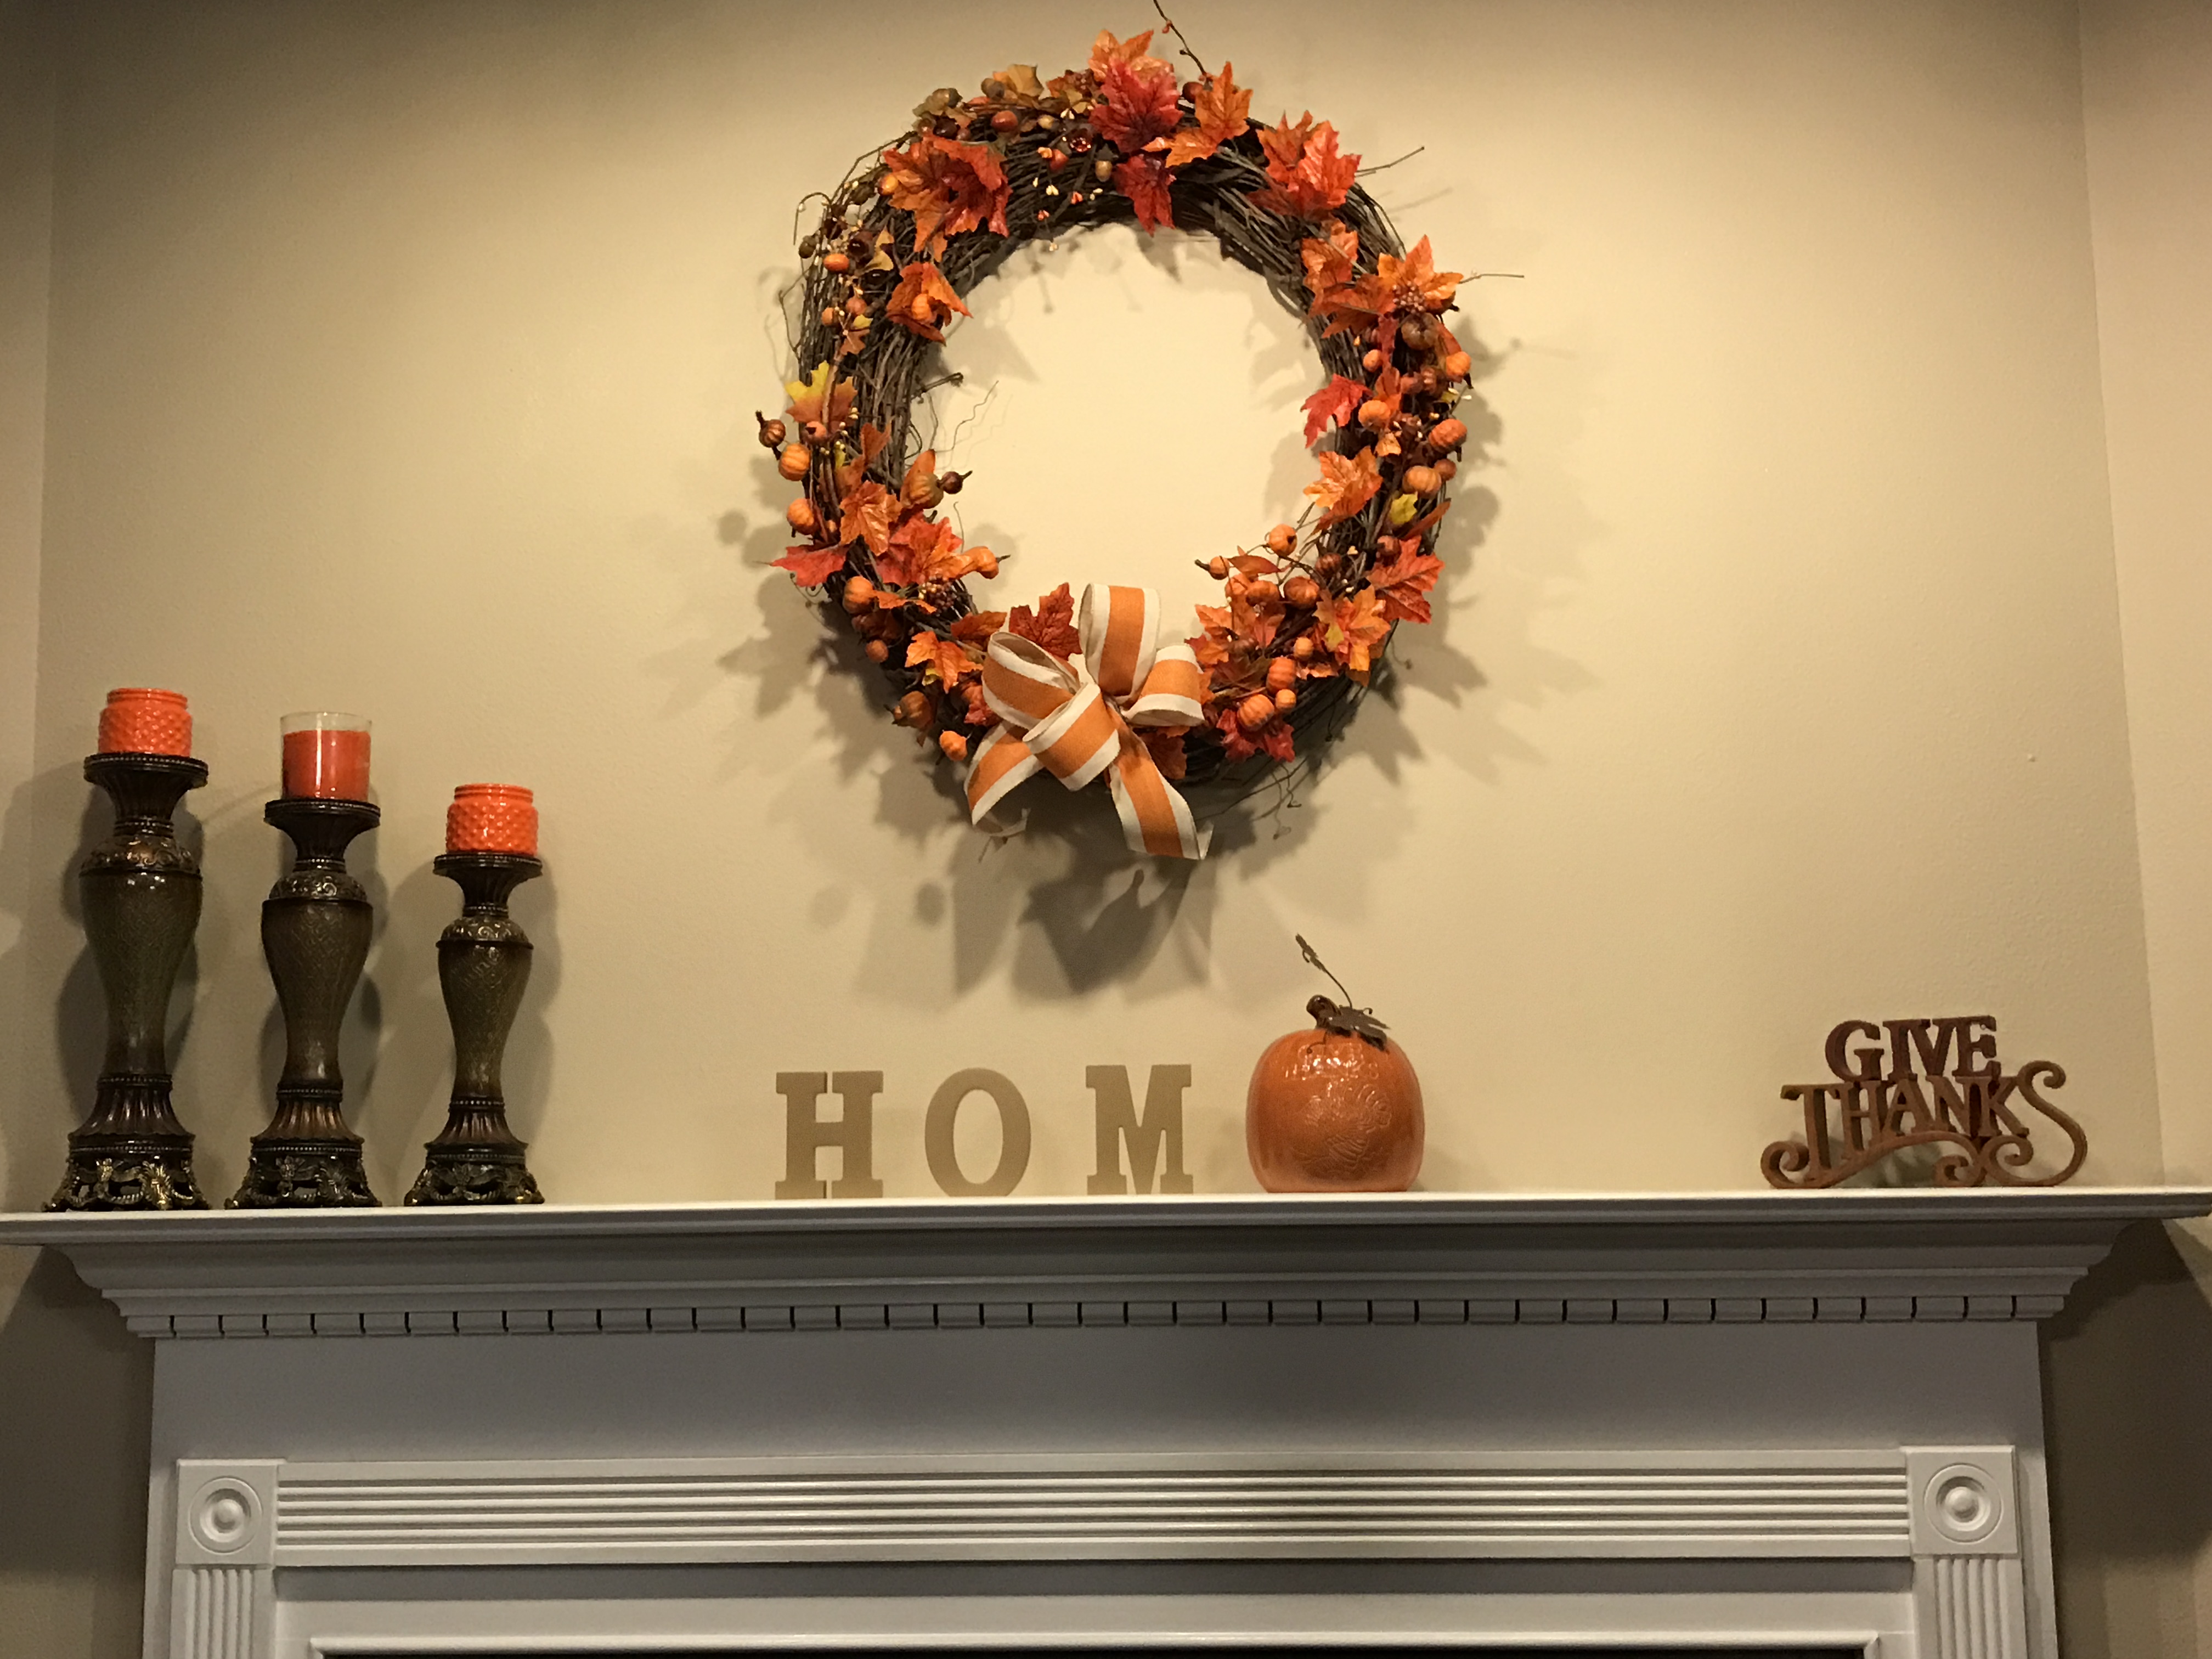 This wreath was home made with pumpkin sprigs obtained form the Habitat for Humanity Restore.